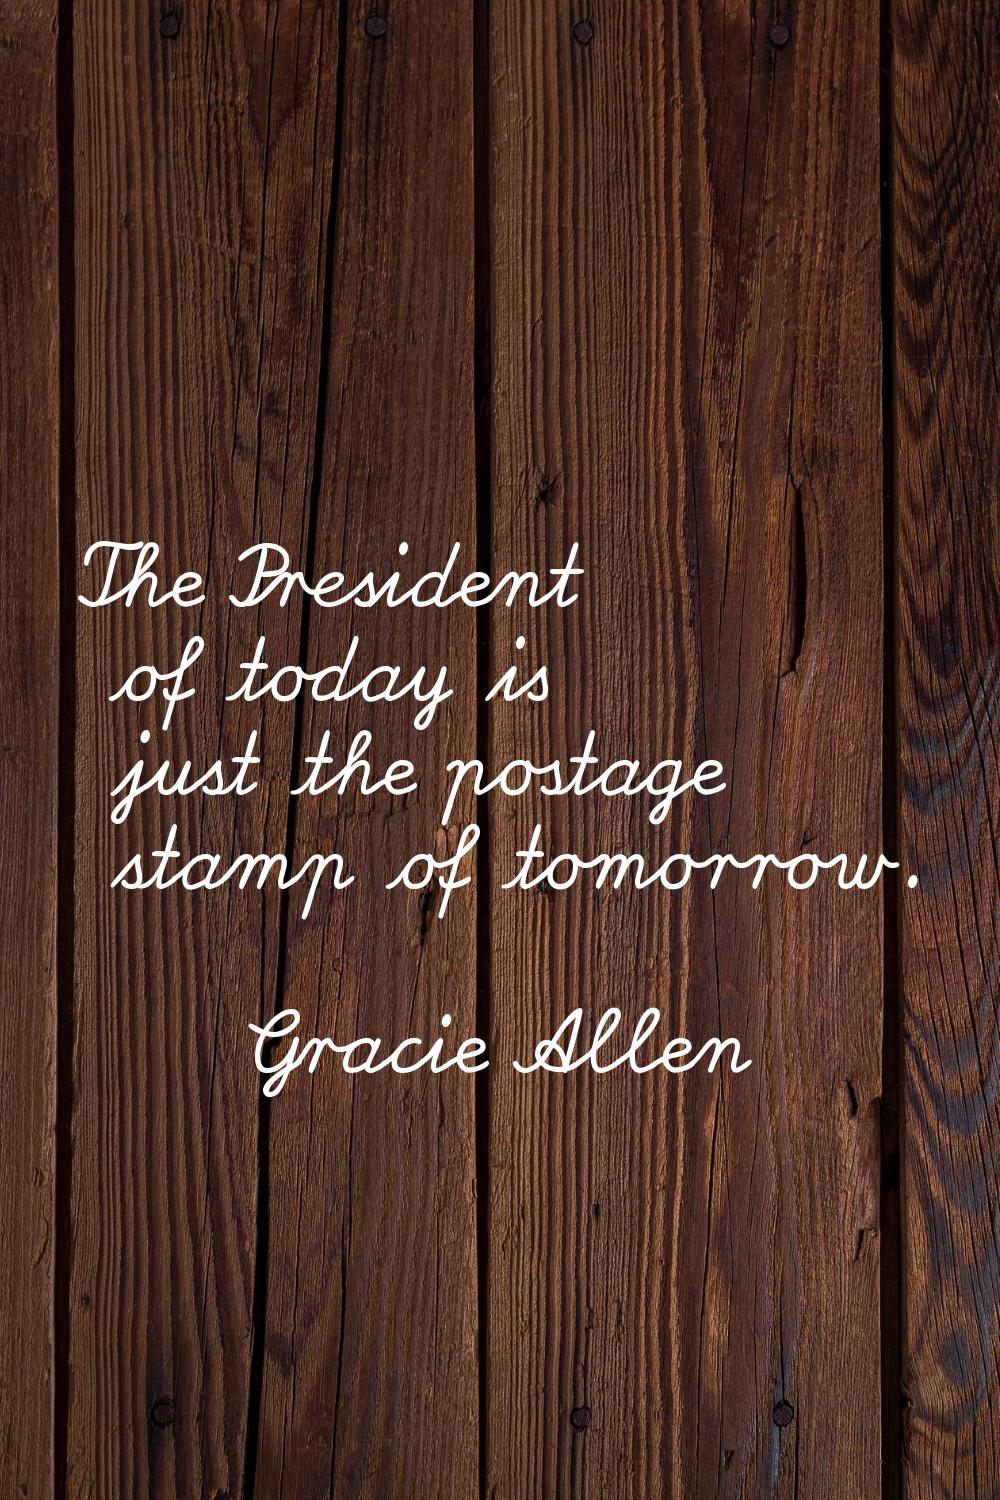 The President of today is just the postage stamp of tomorrow.